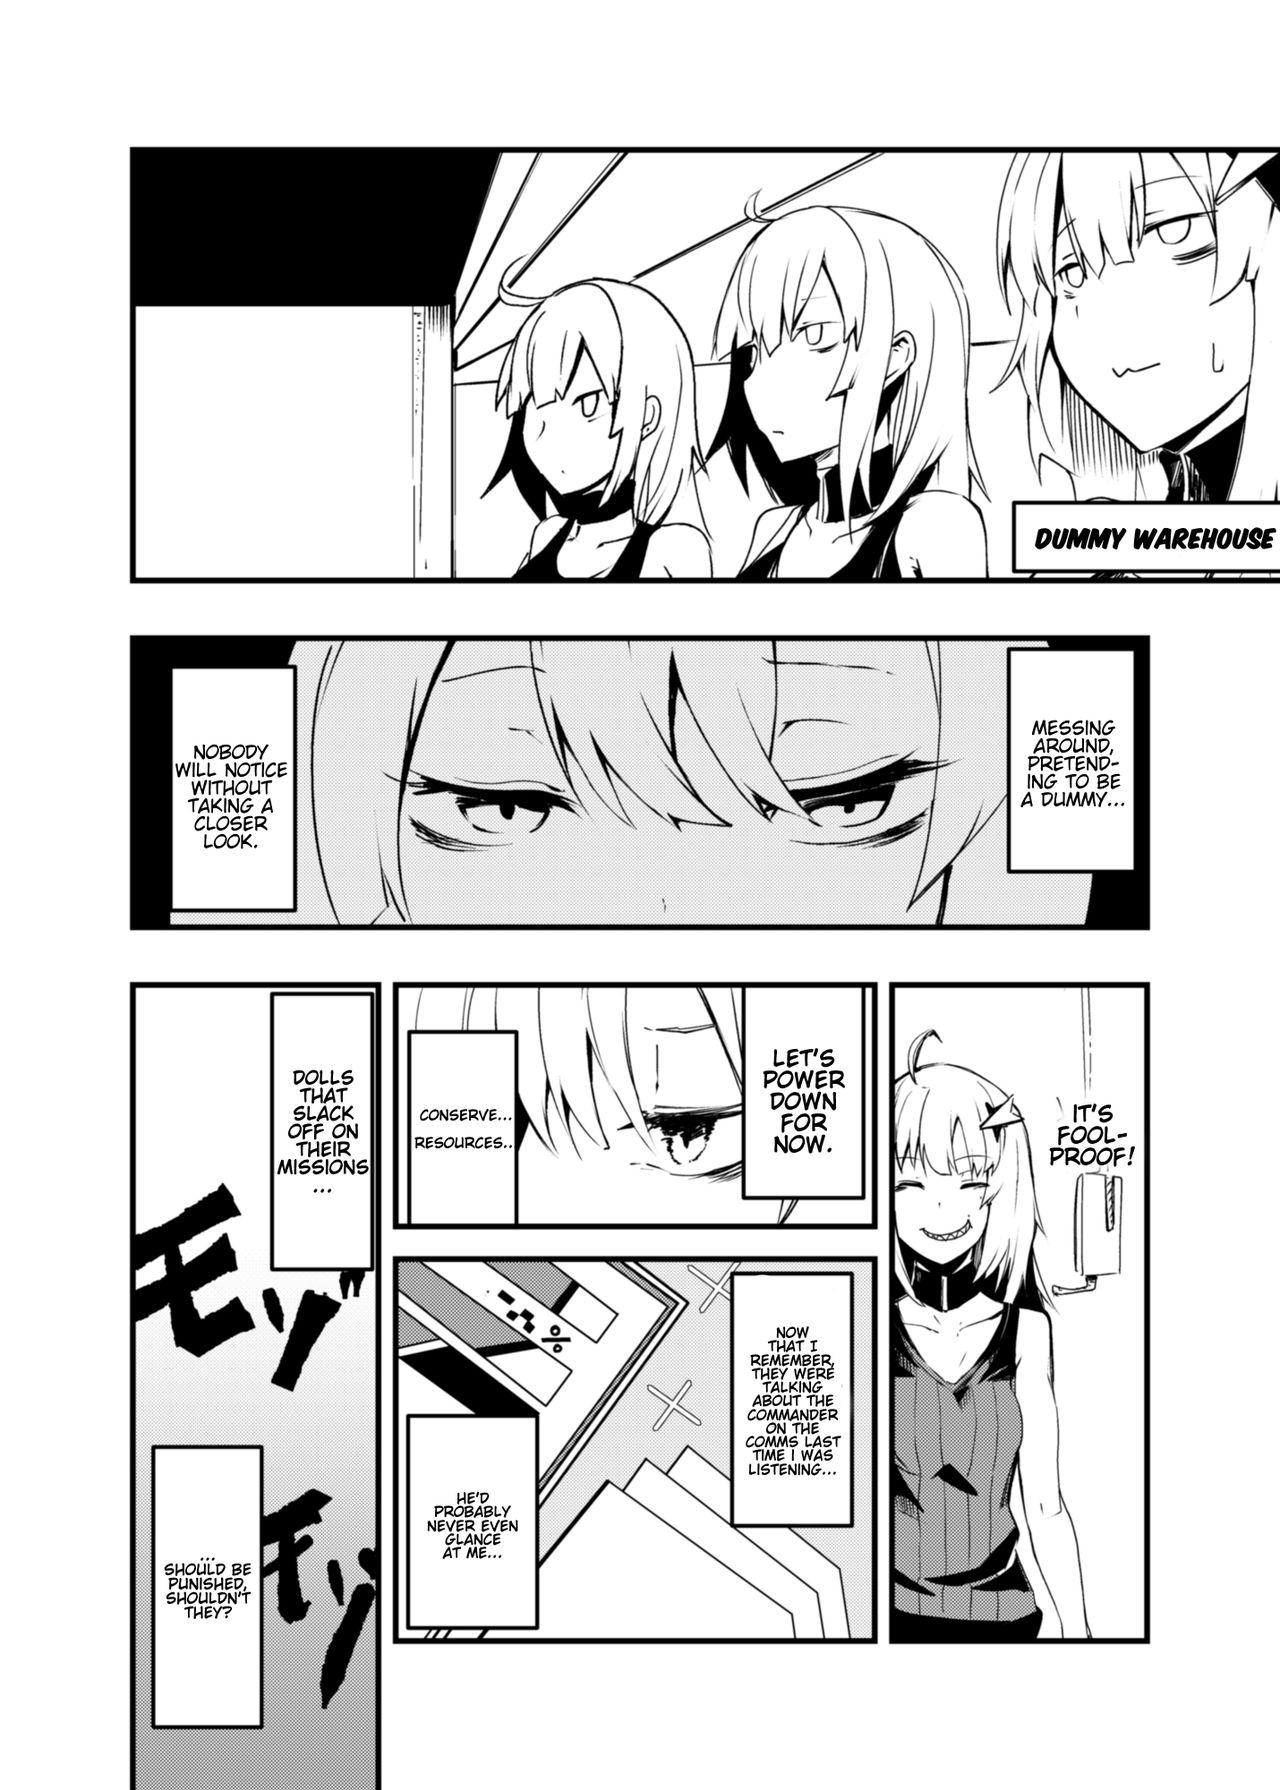 Girl Gets Fucked Dummy de Saborou. | Wagging Dummy. - Girls frontline Penis Sucking - Page 3